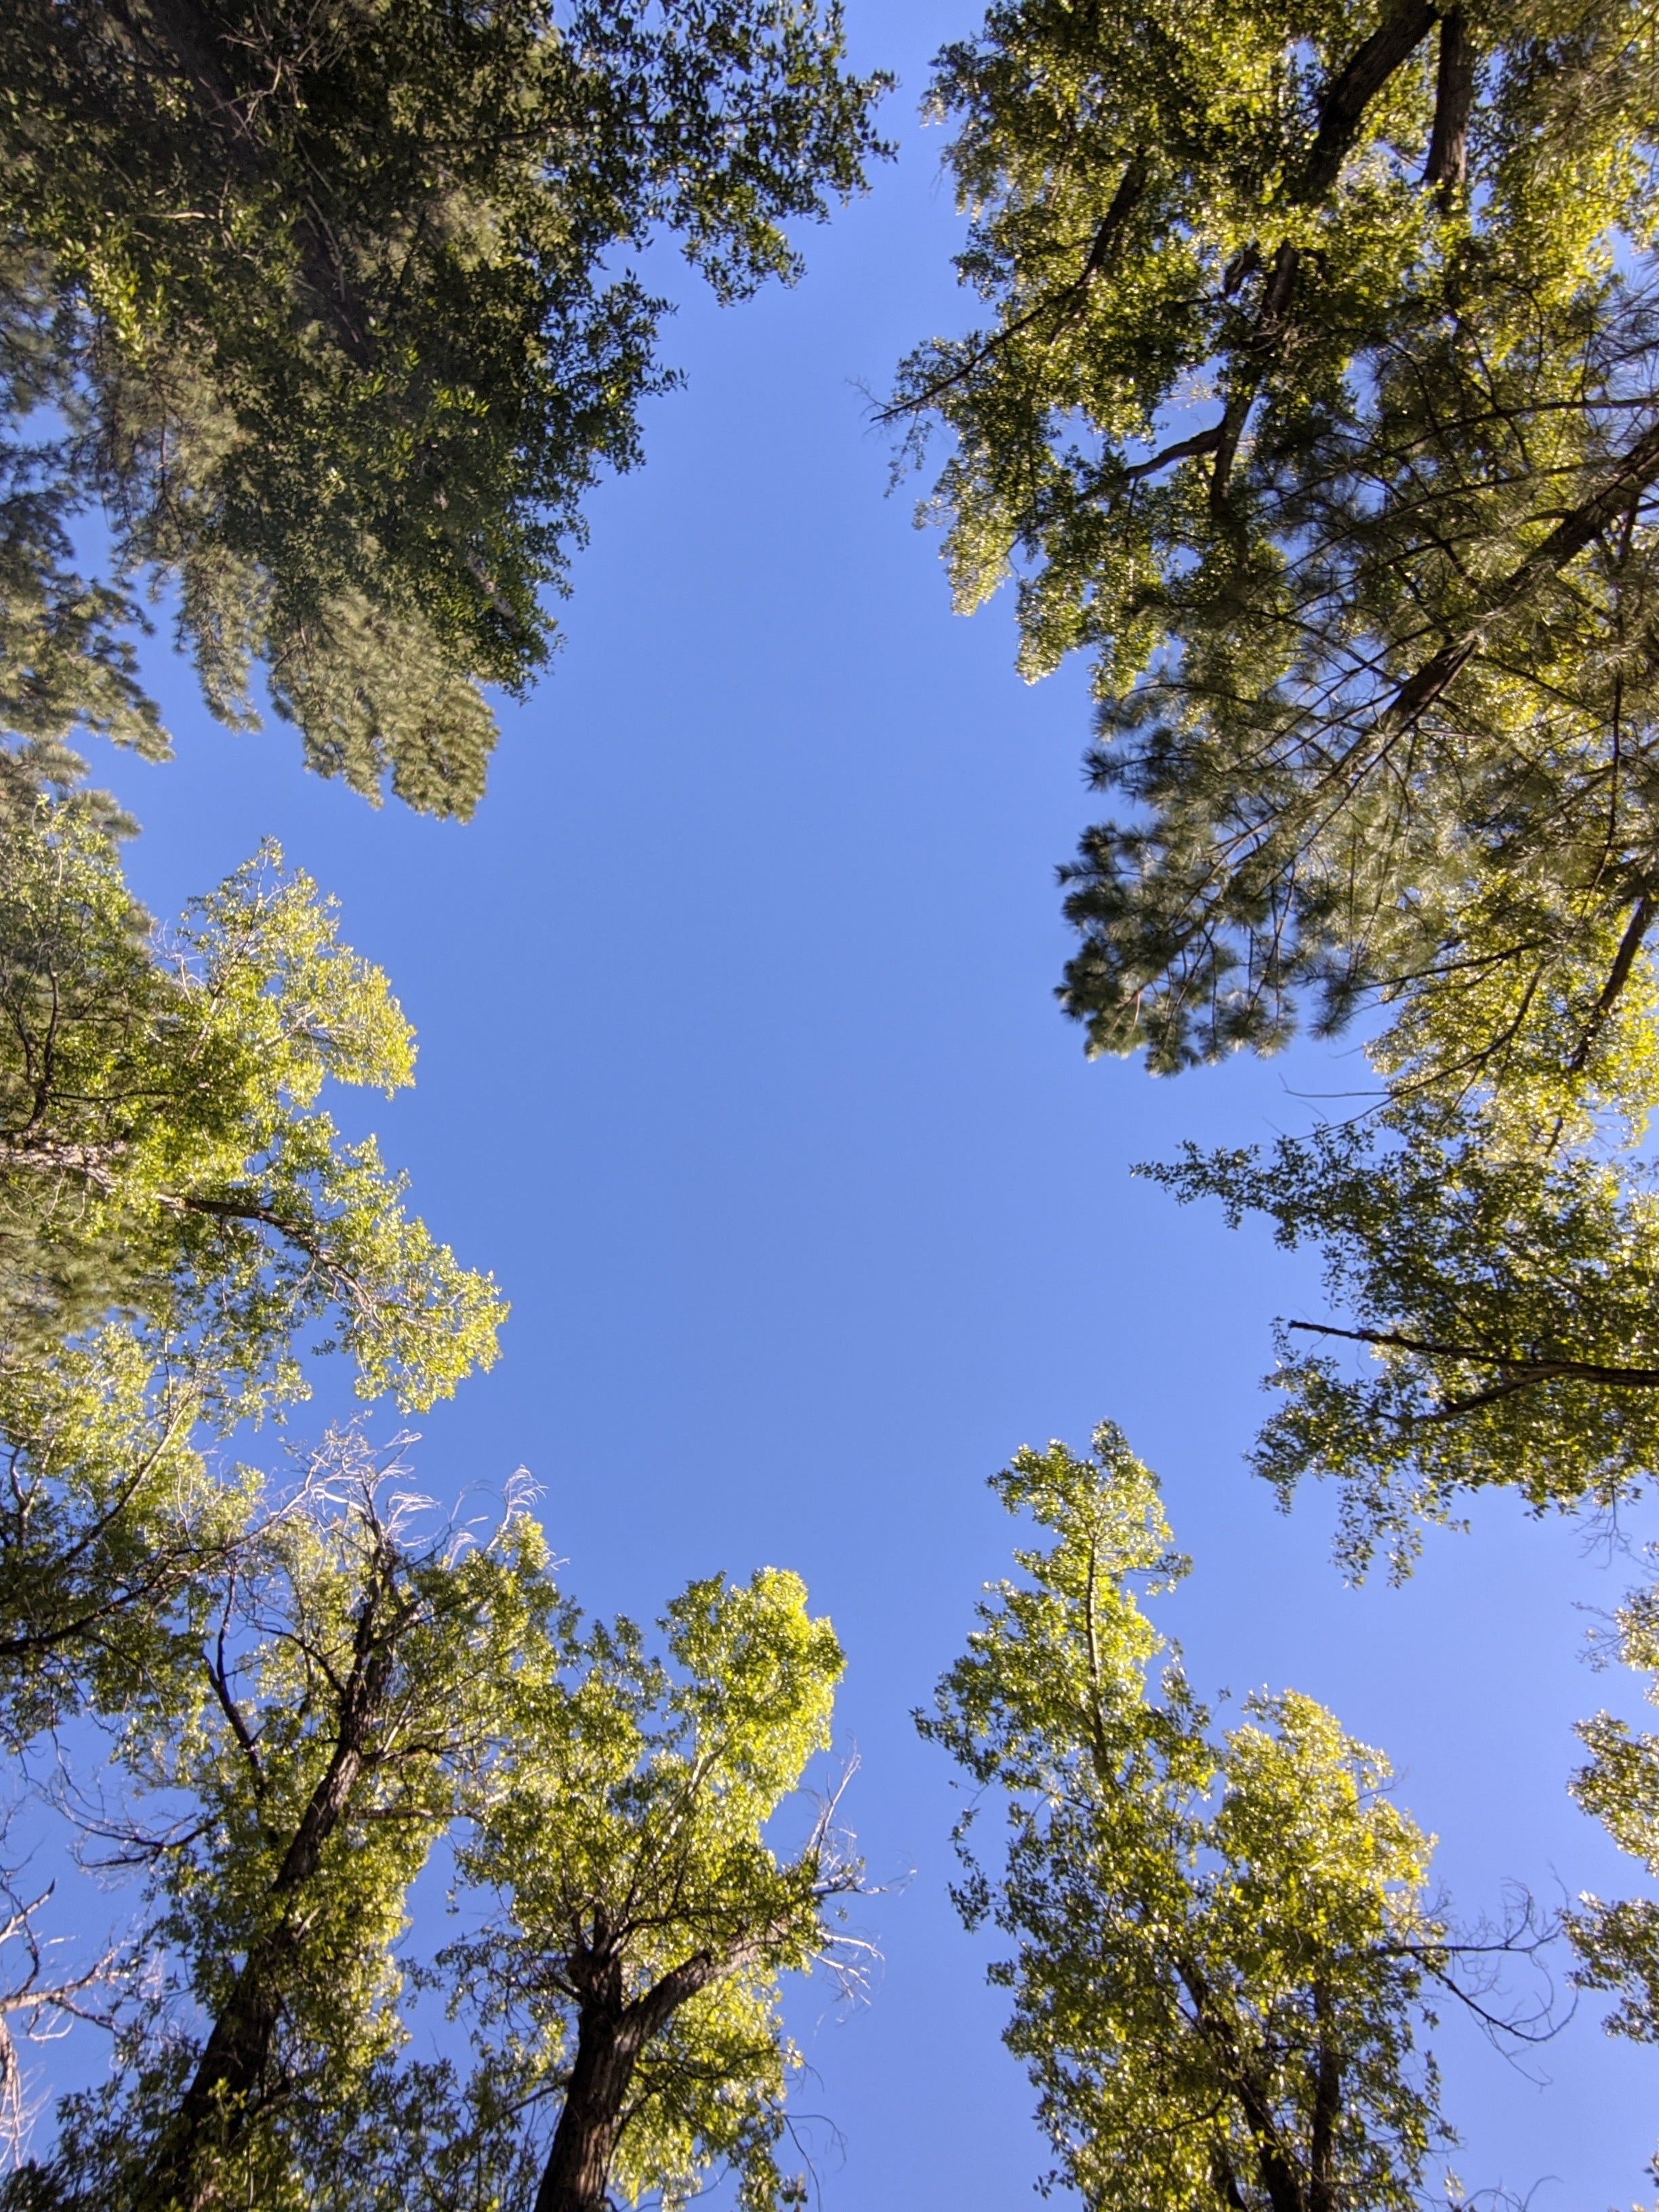 View looking up from picnic table